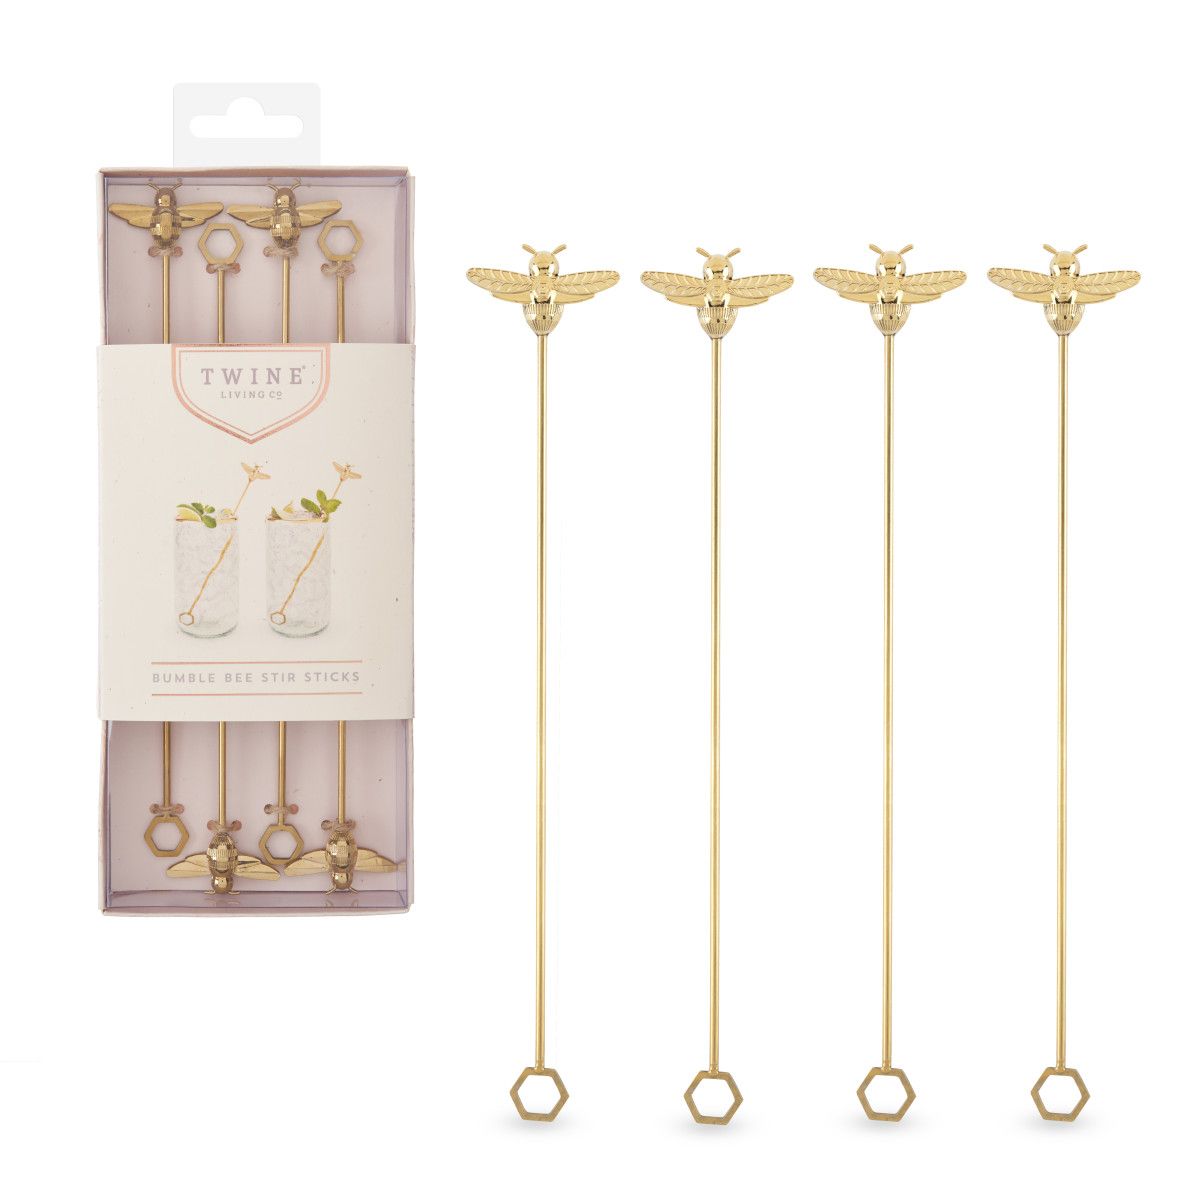 4Pcs Bumble Bee Cocktail Stirrers Swizzle Sticks Stainless Steel 7.5  Coffee Beverage Stir Sticks with Gold Decor Top for Mixing Cocktail, Hot  Cocoa